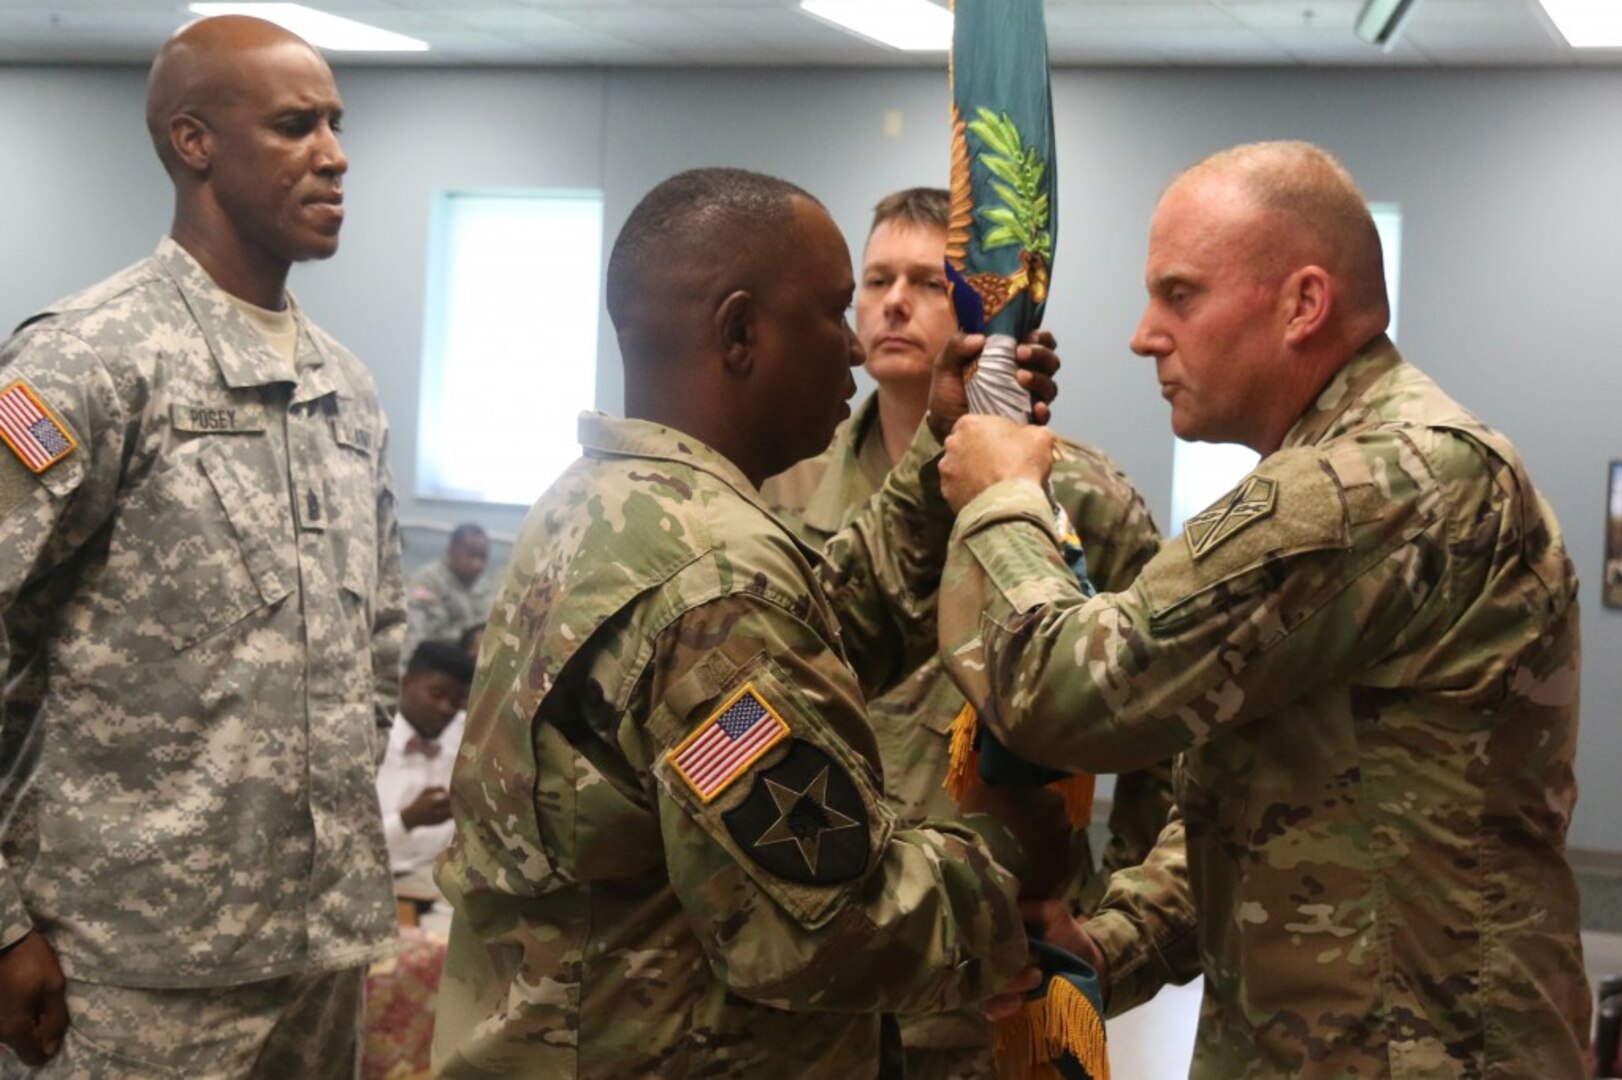 Zollar takes command of 183rd RTI